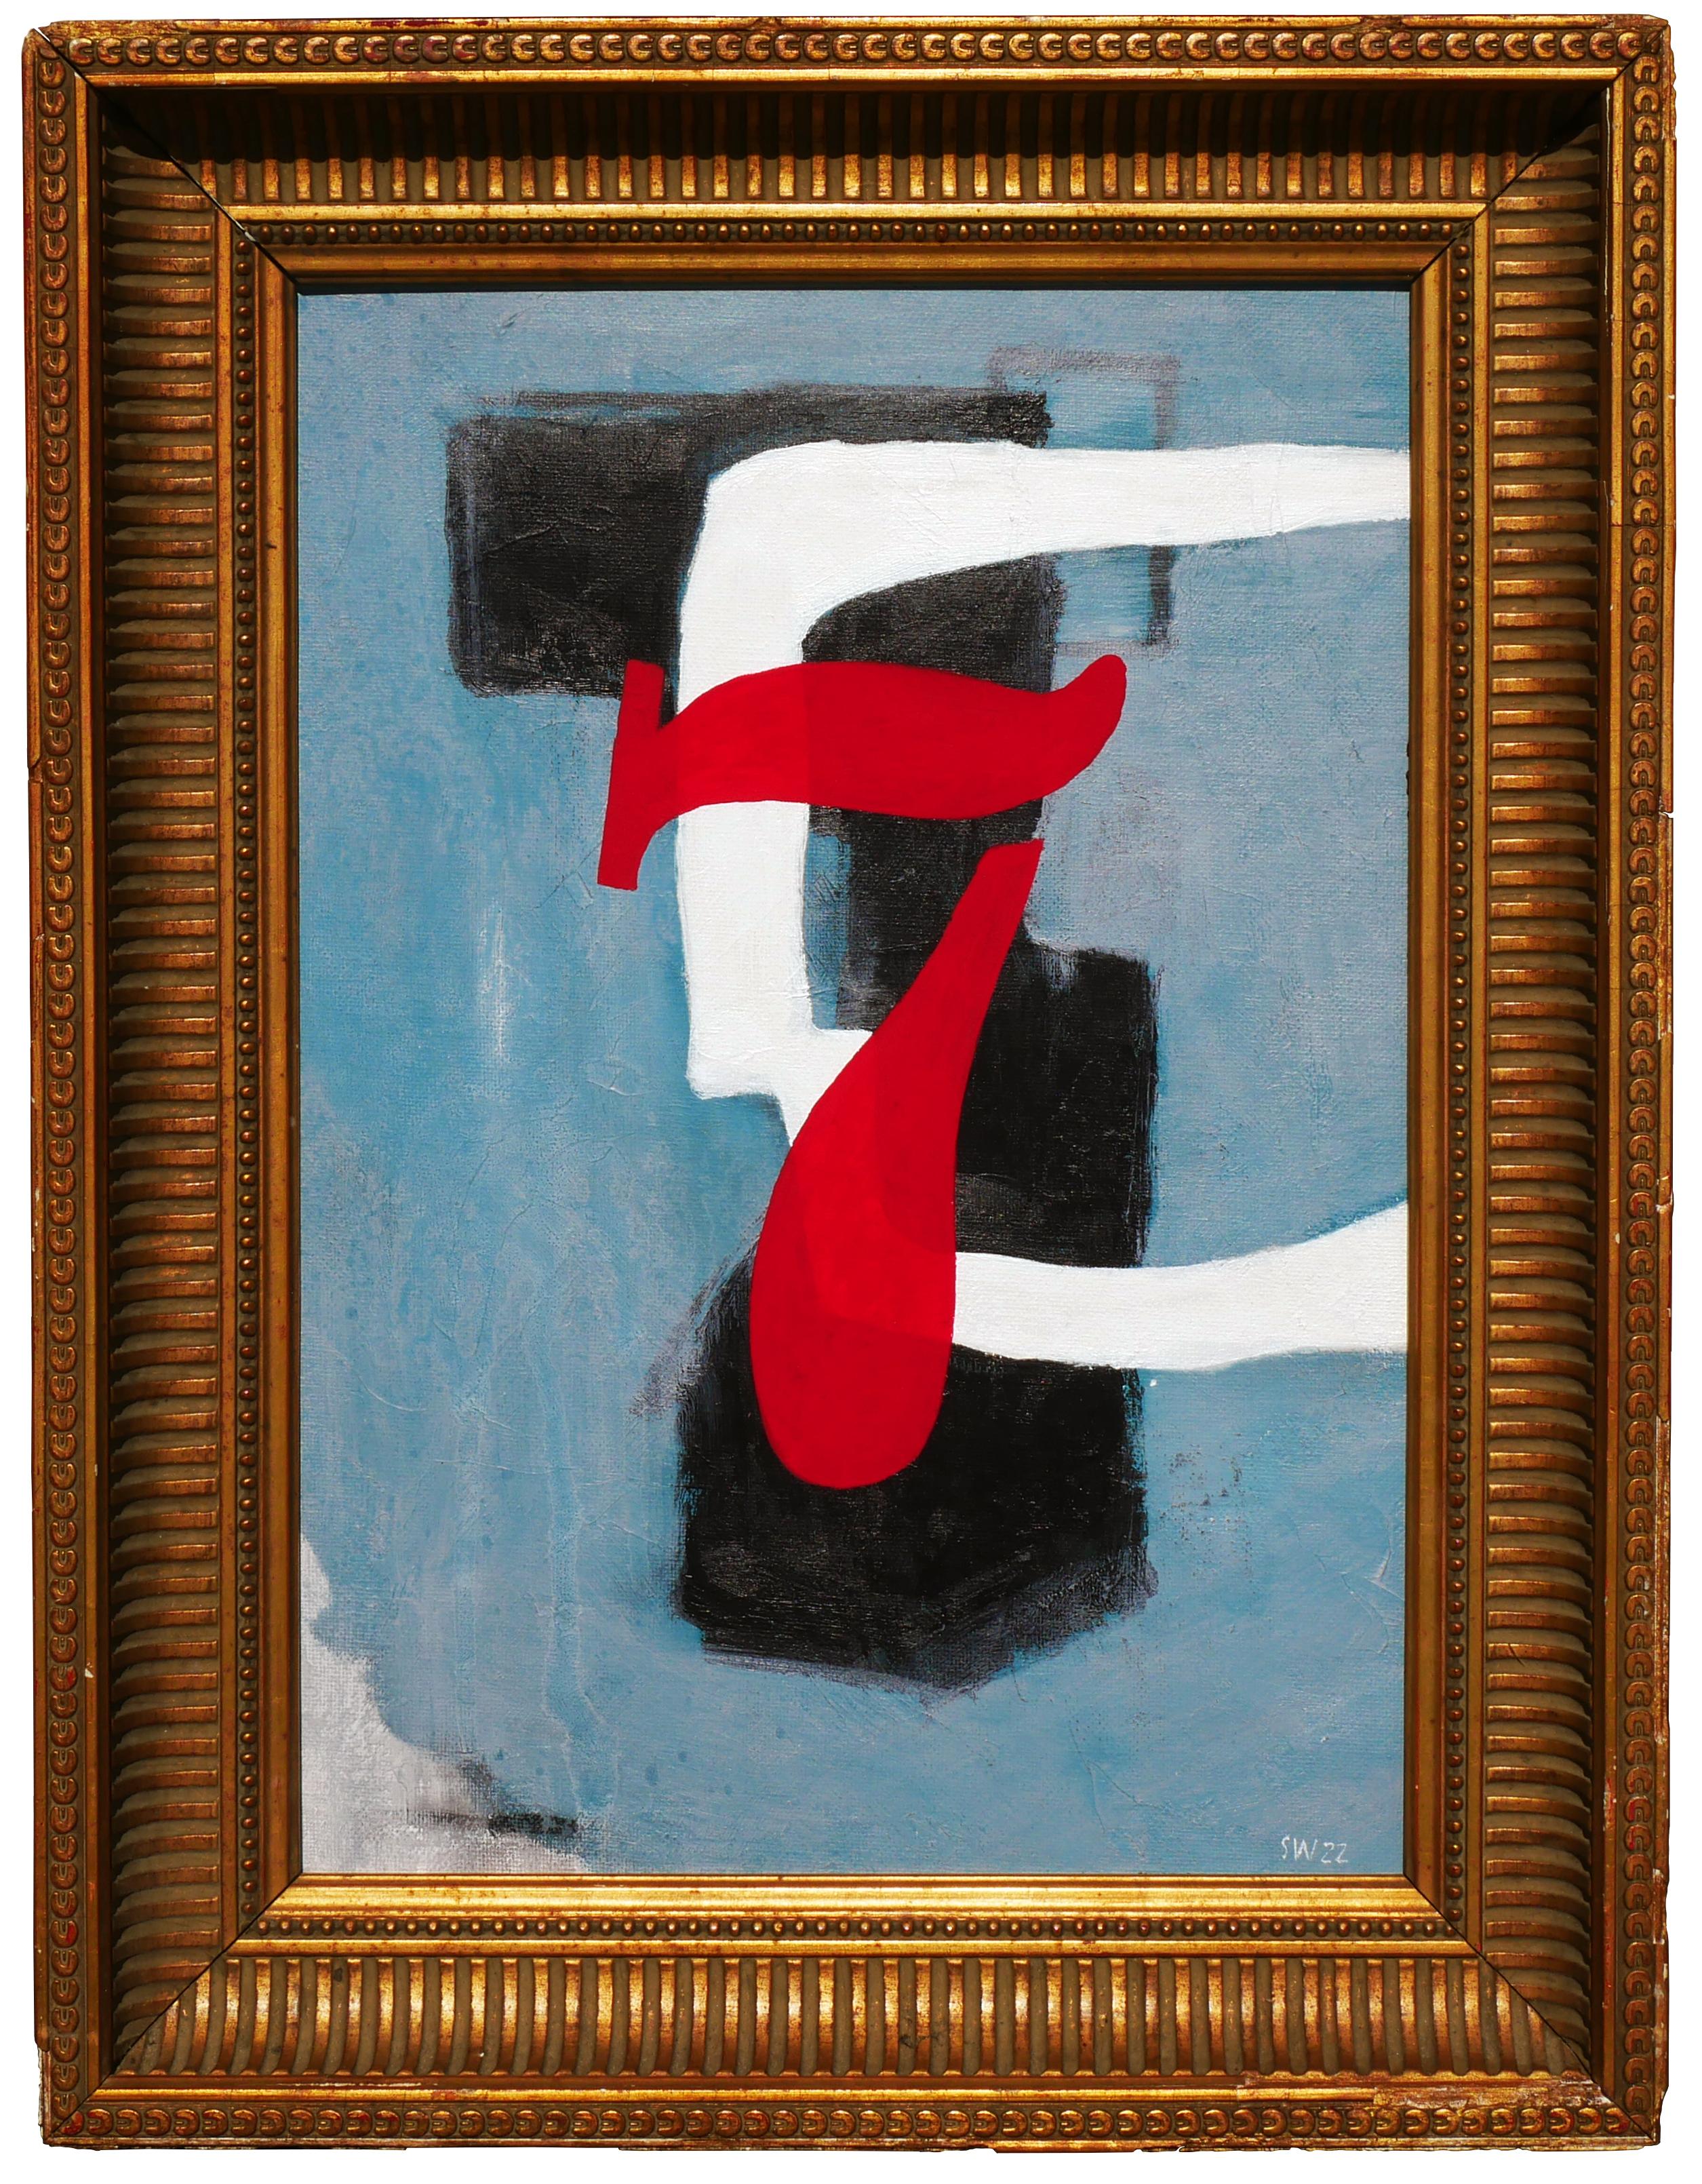 Scott Woodard Abstract Painting - "7" Red, Blue, White & Black Abstract Contemporary Painting																					